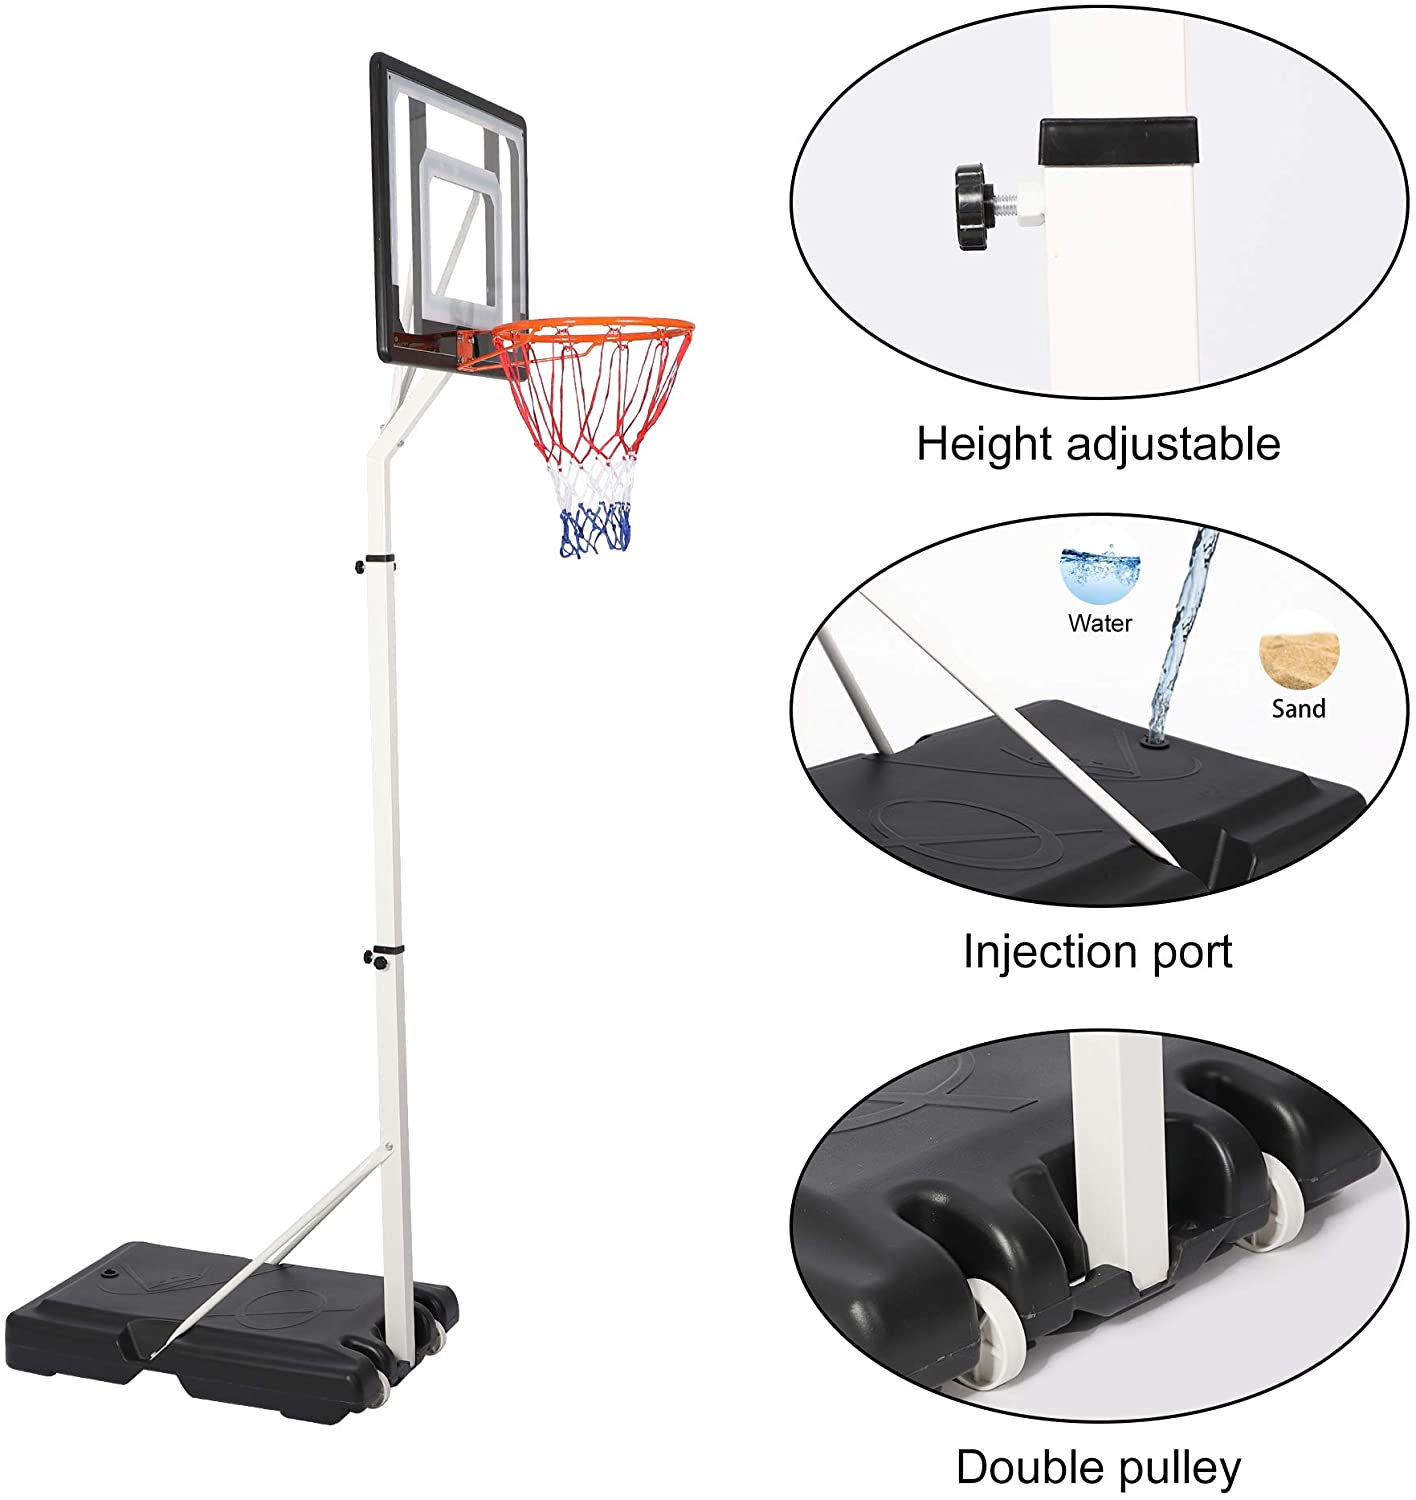 Portable Basketball Hoop Backboard System Stand Outdoor Sports Equipment Height Adjustable 6.9Ft-8.5Ft with Wheels